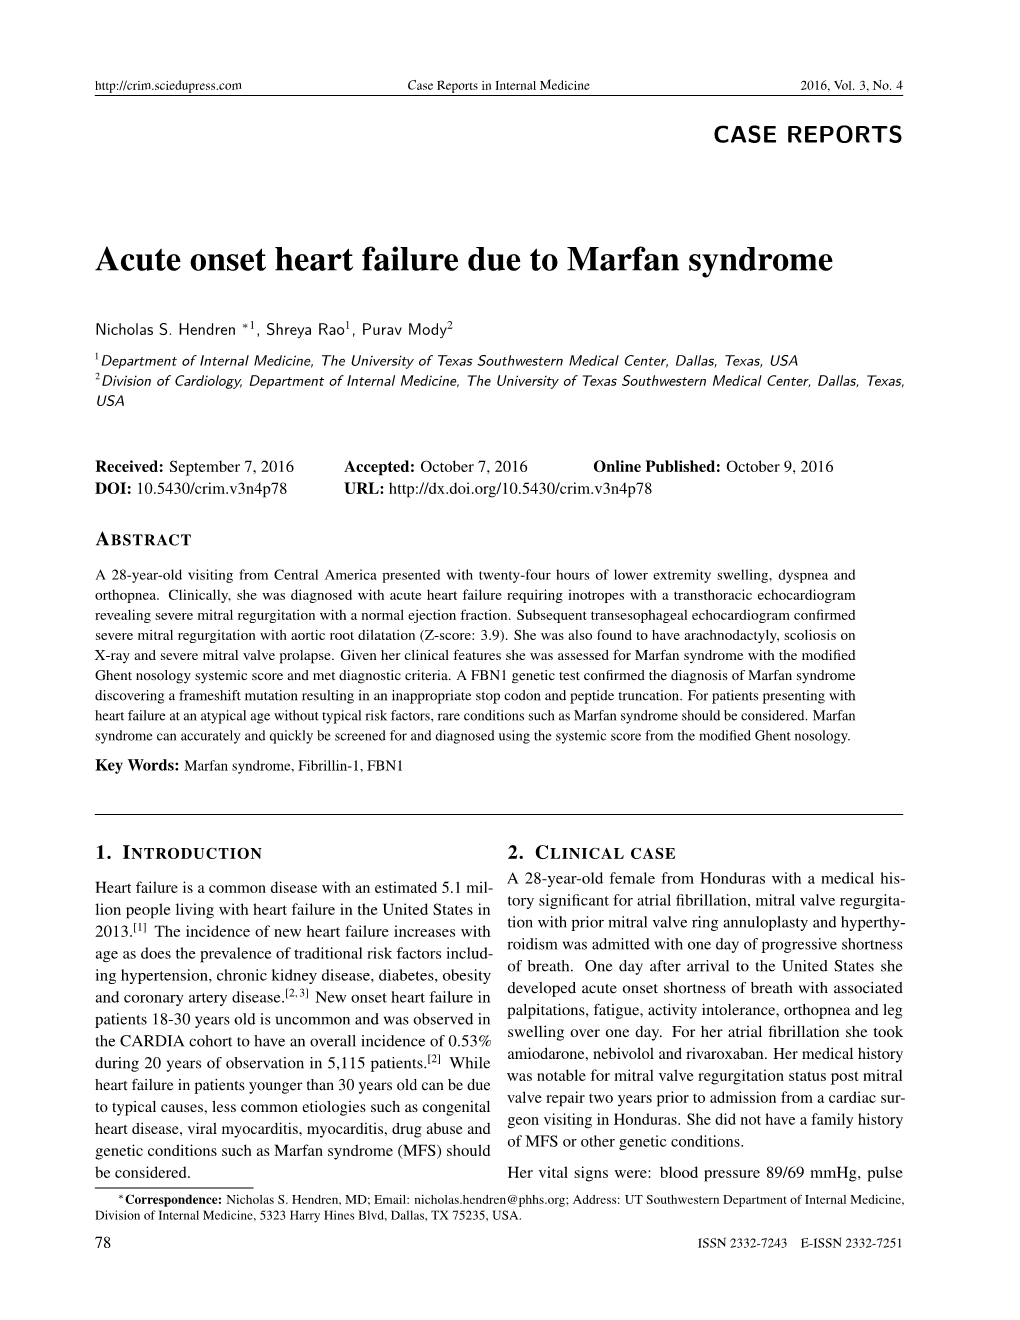 Acute Onset Heart Failure Due to Marfan Syndrome